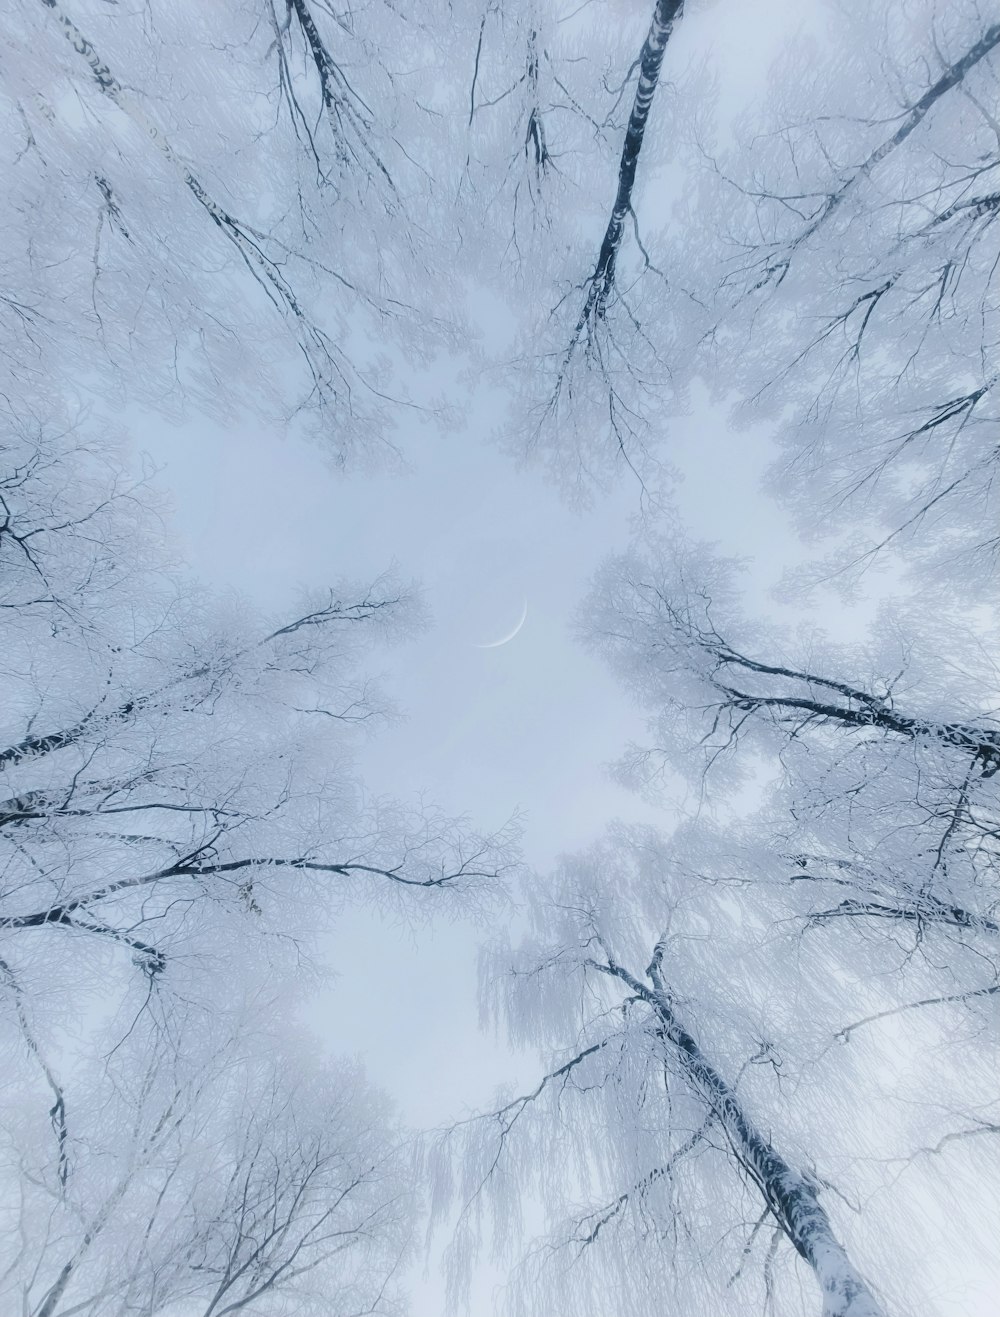 looking up at a group of trees in the snow